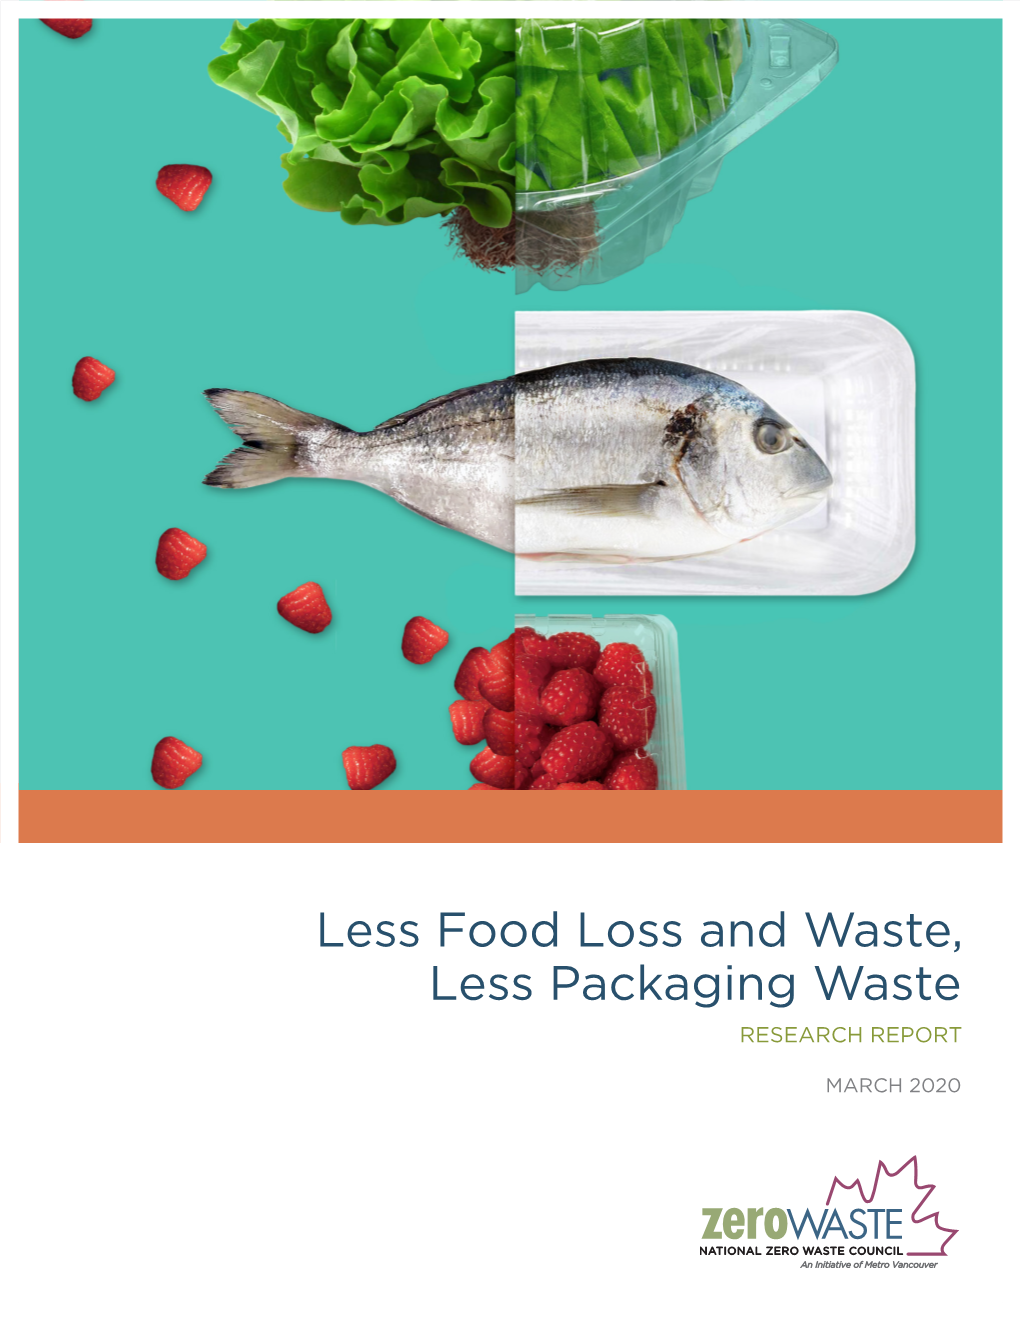 Less Food Loss and Waste, Less Packaging Waste RESEARCH REPORT